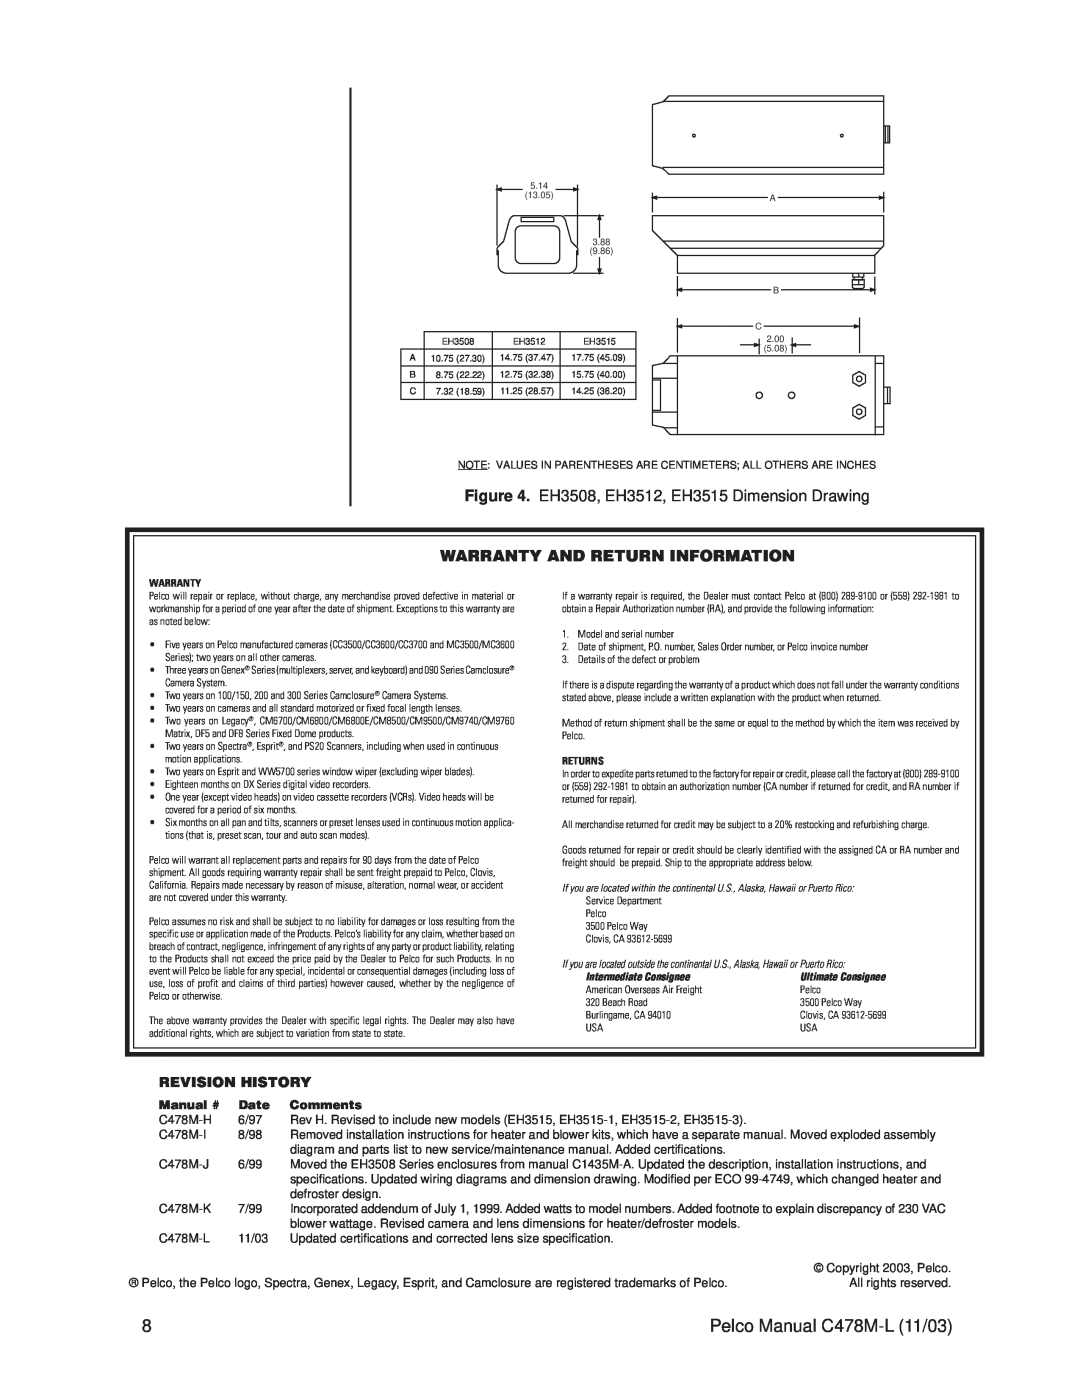 Pelco EH3512, EH3515 operation manual Warranty And Return Information, Pelco Manual C478M-L11/03, Manual #, Date, Comments 